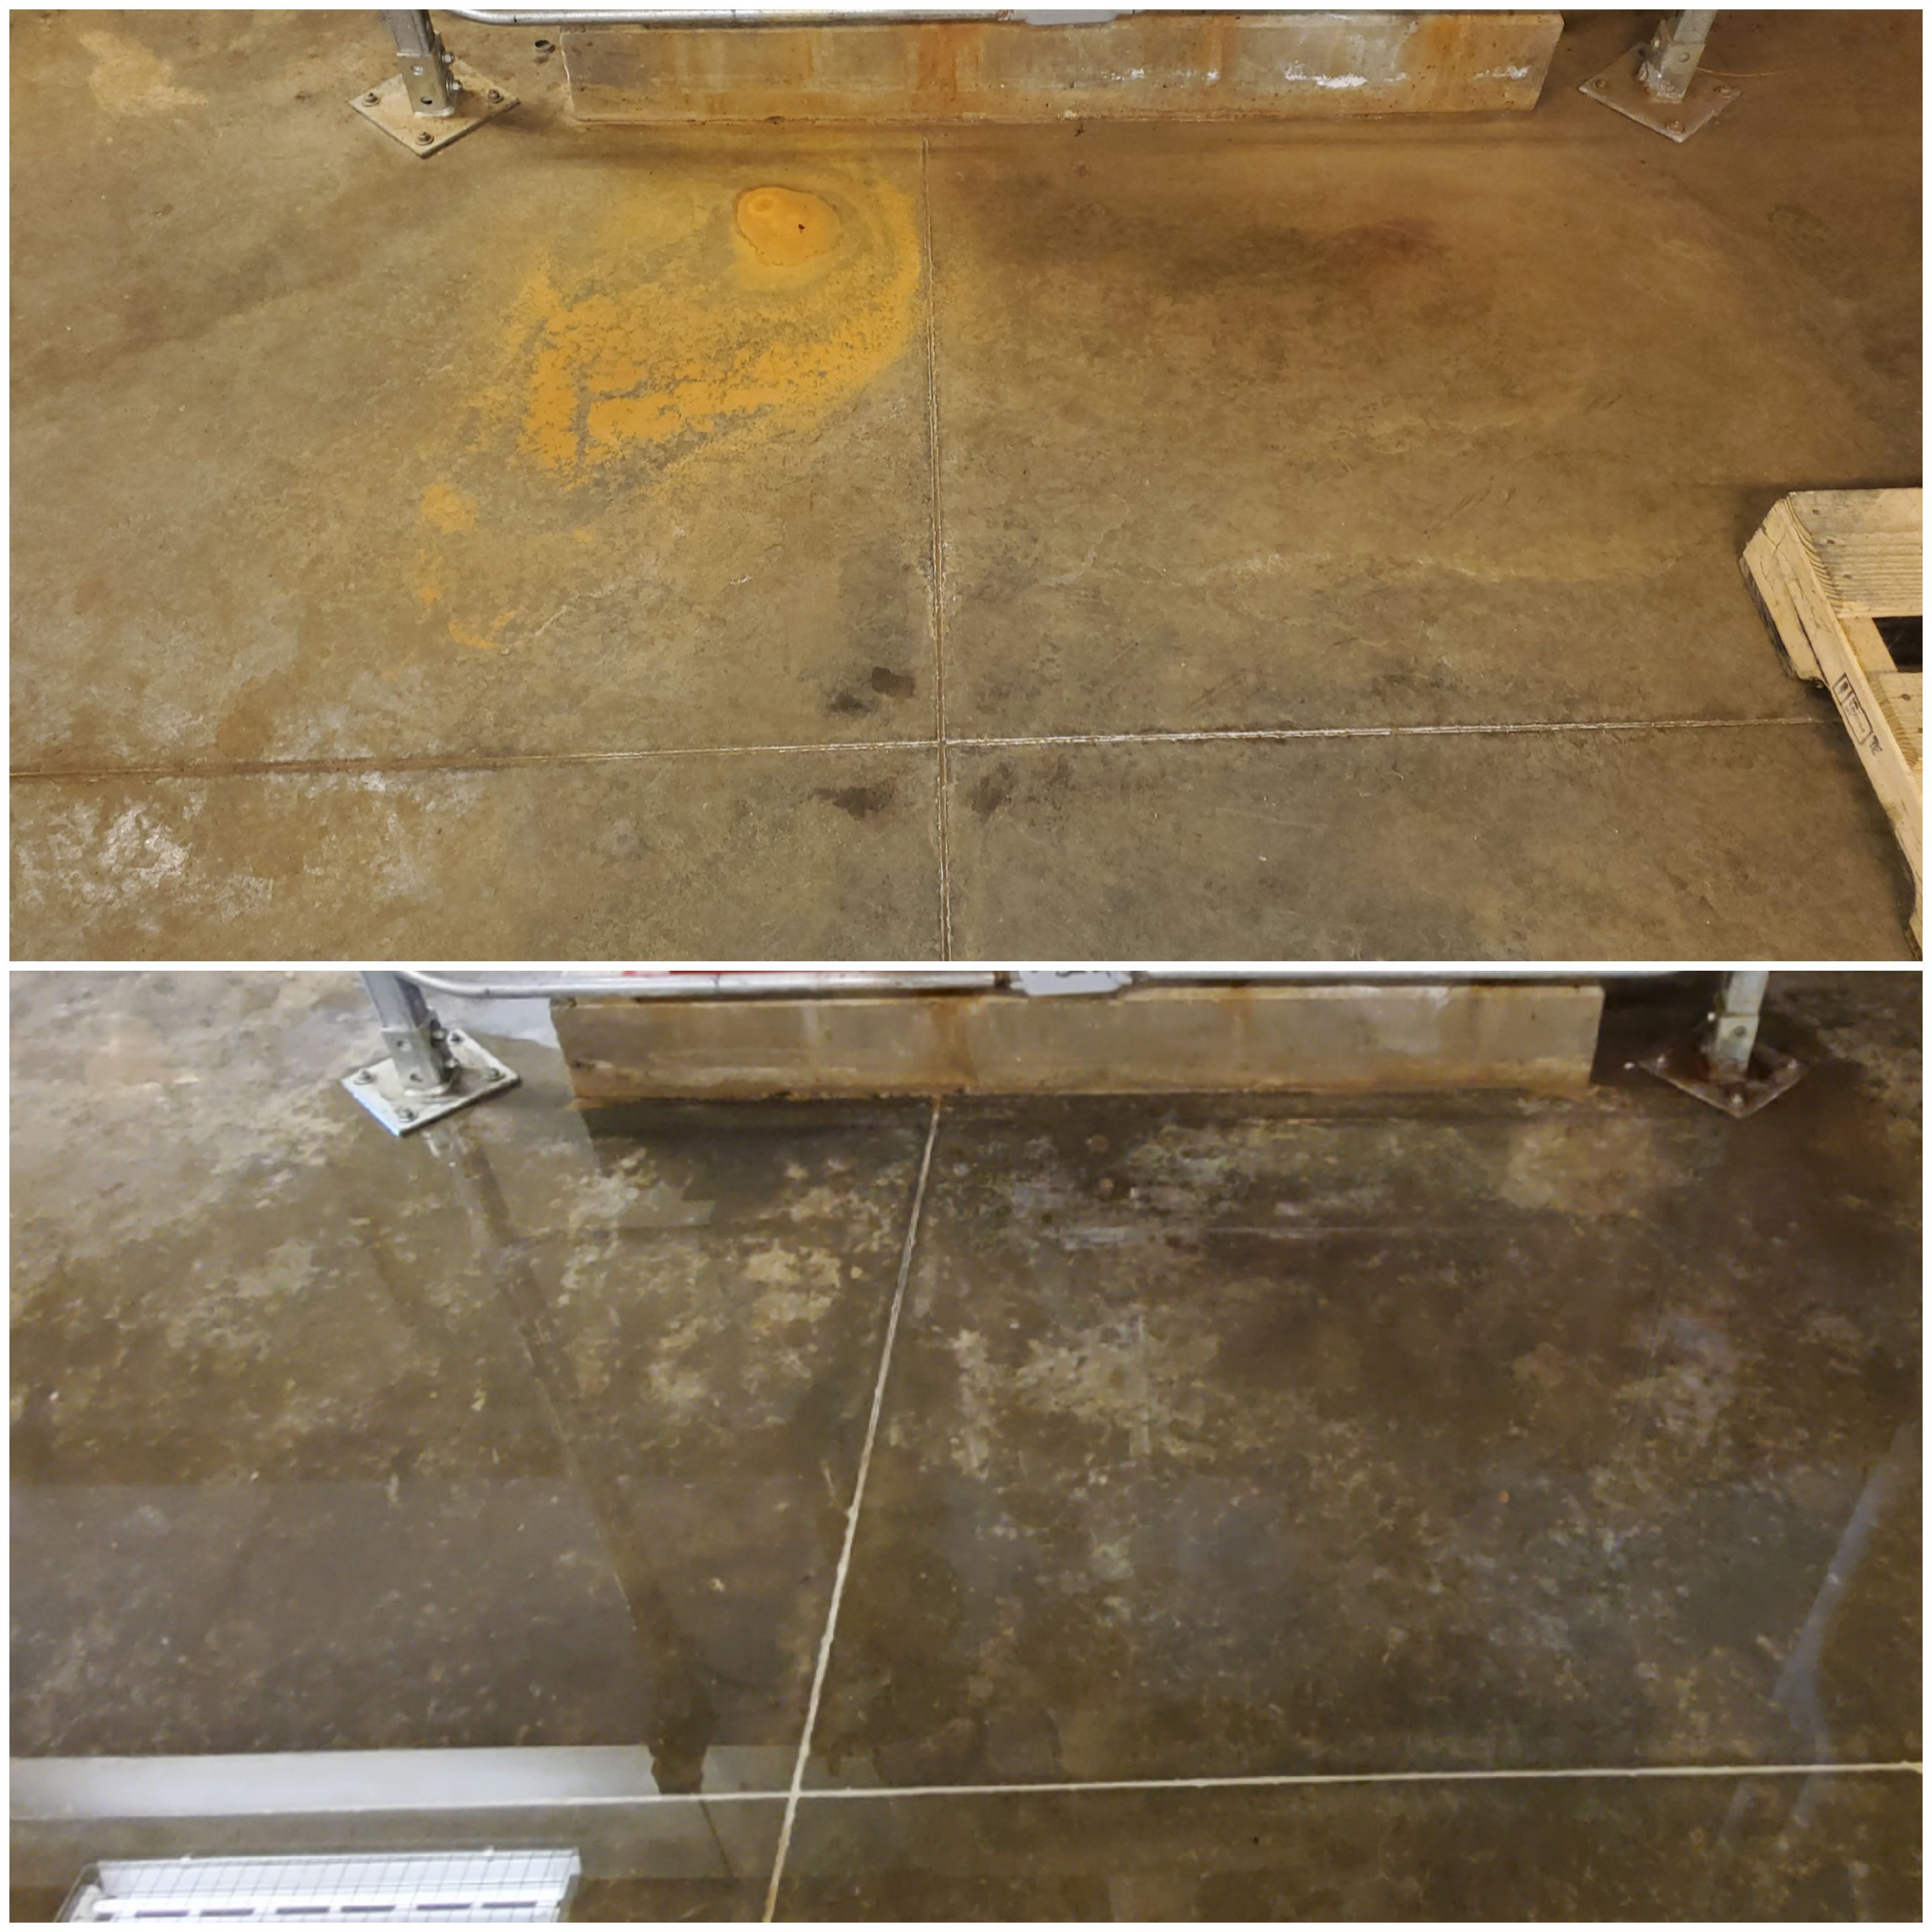 RUST STAIN REMOVAL FROM MECHANICAL ROOM FLOORS IN TUSCALOOSA, AL